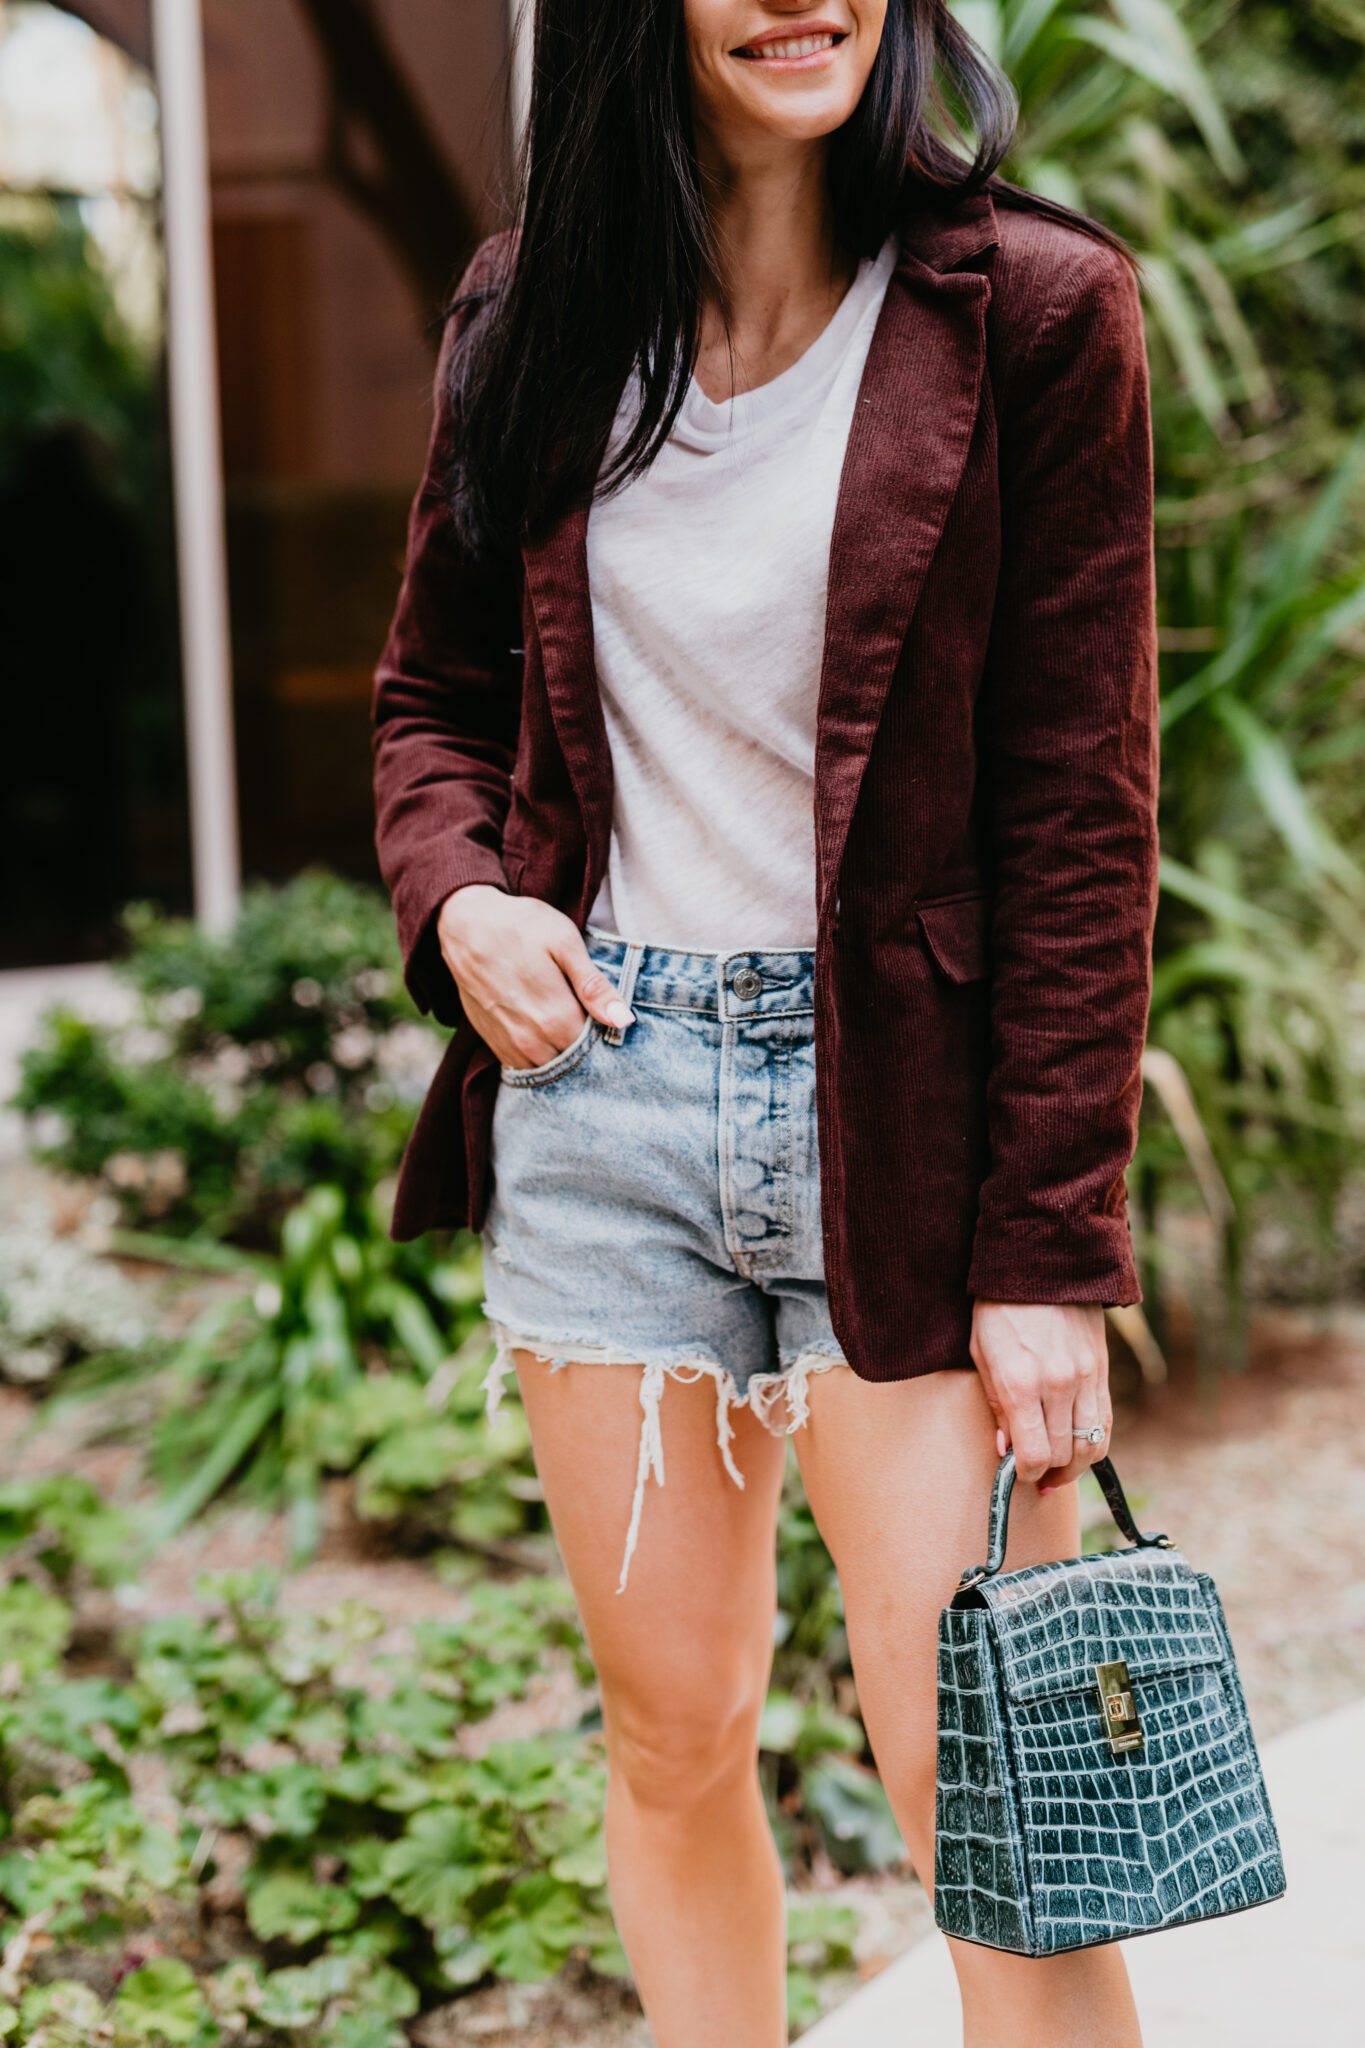 What to wear with denim shorts in the Spring, denim shorts outfit ideas featured by top Las Vegas fashion blog, Outfits & Outings: image of a woman wearing GRLFRND denim shorts 